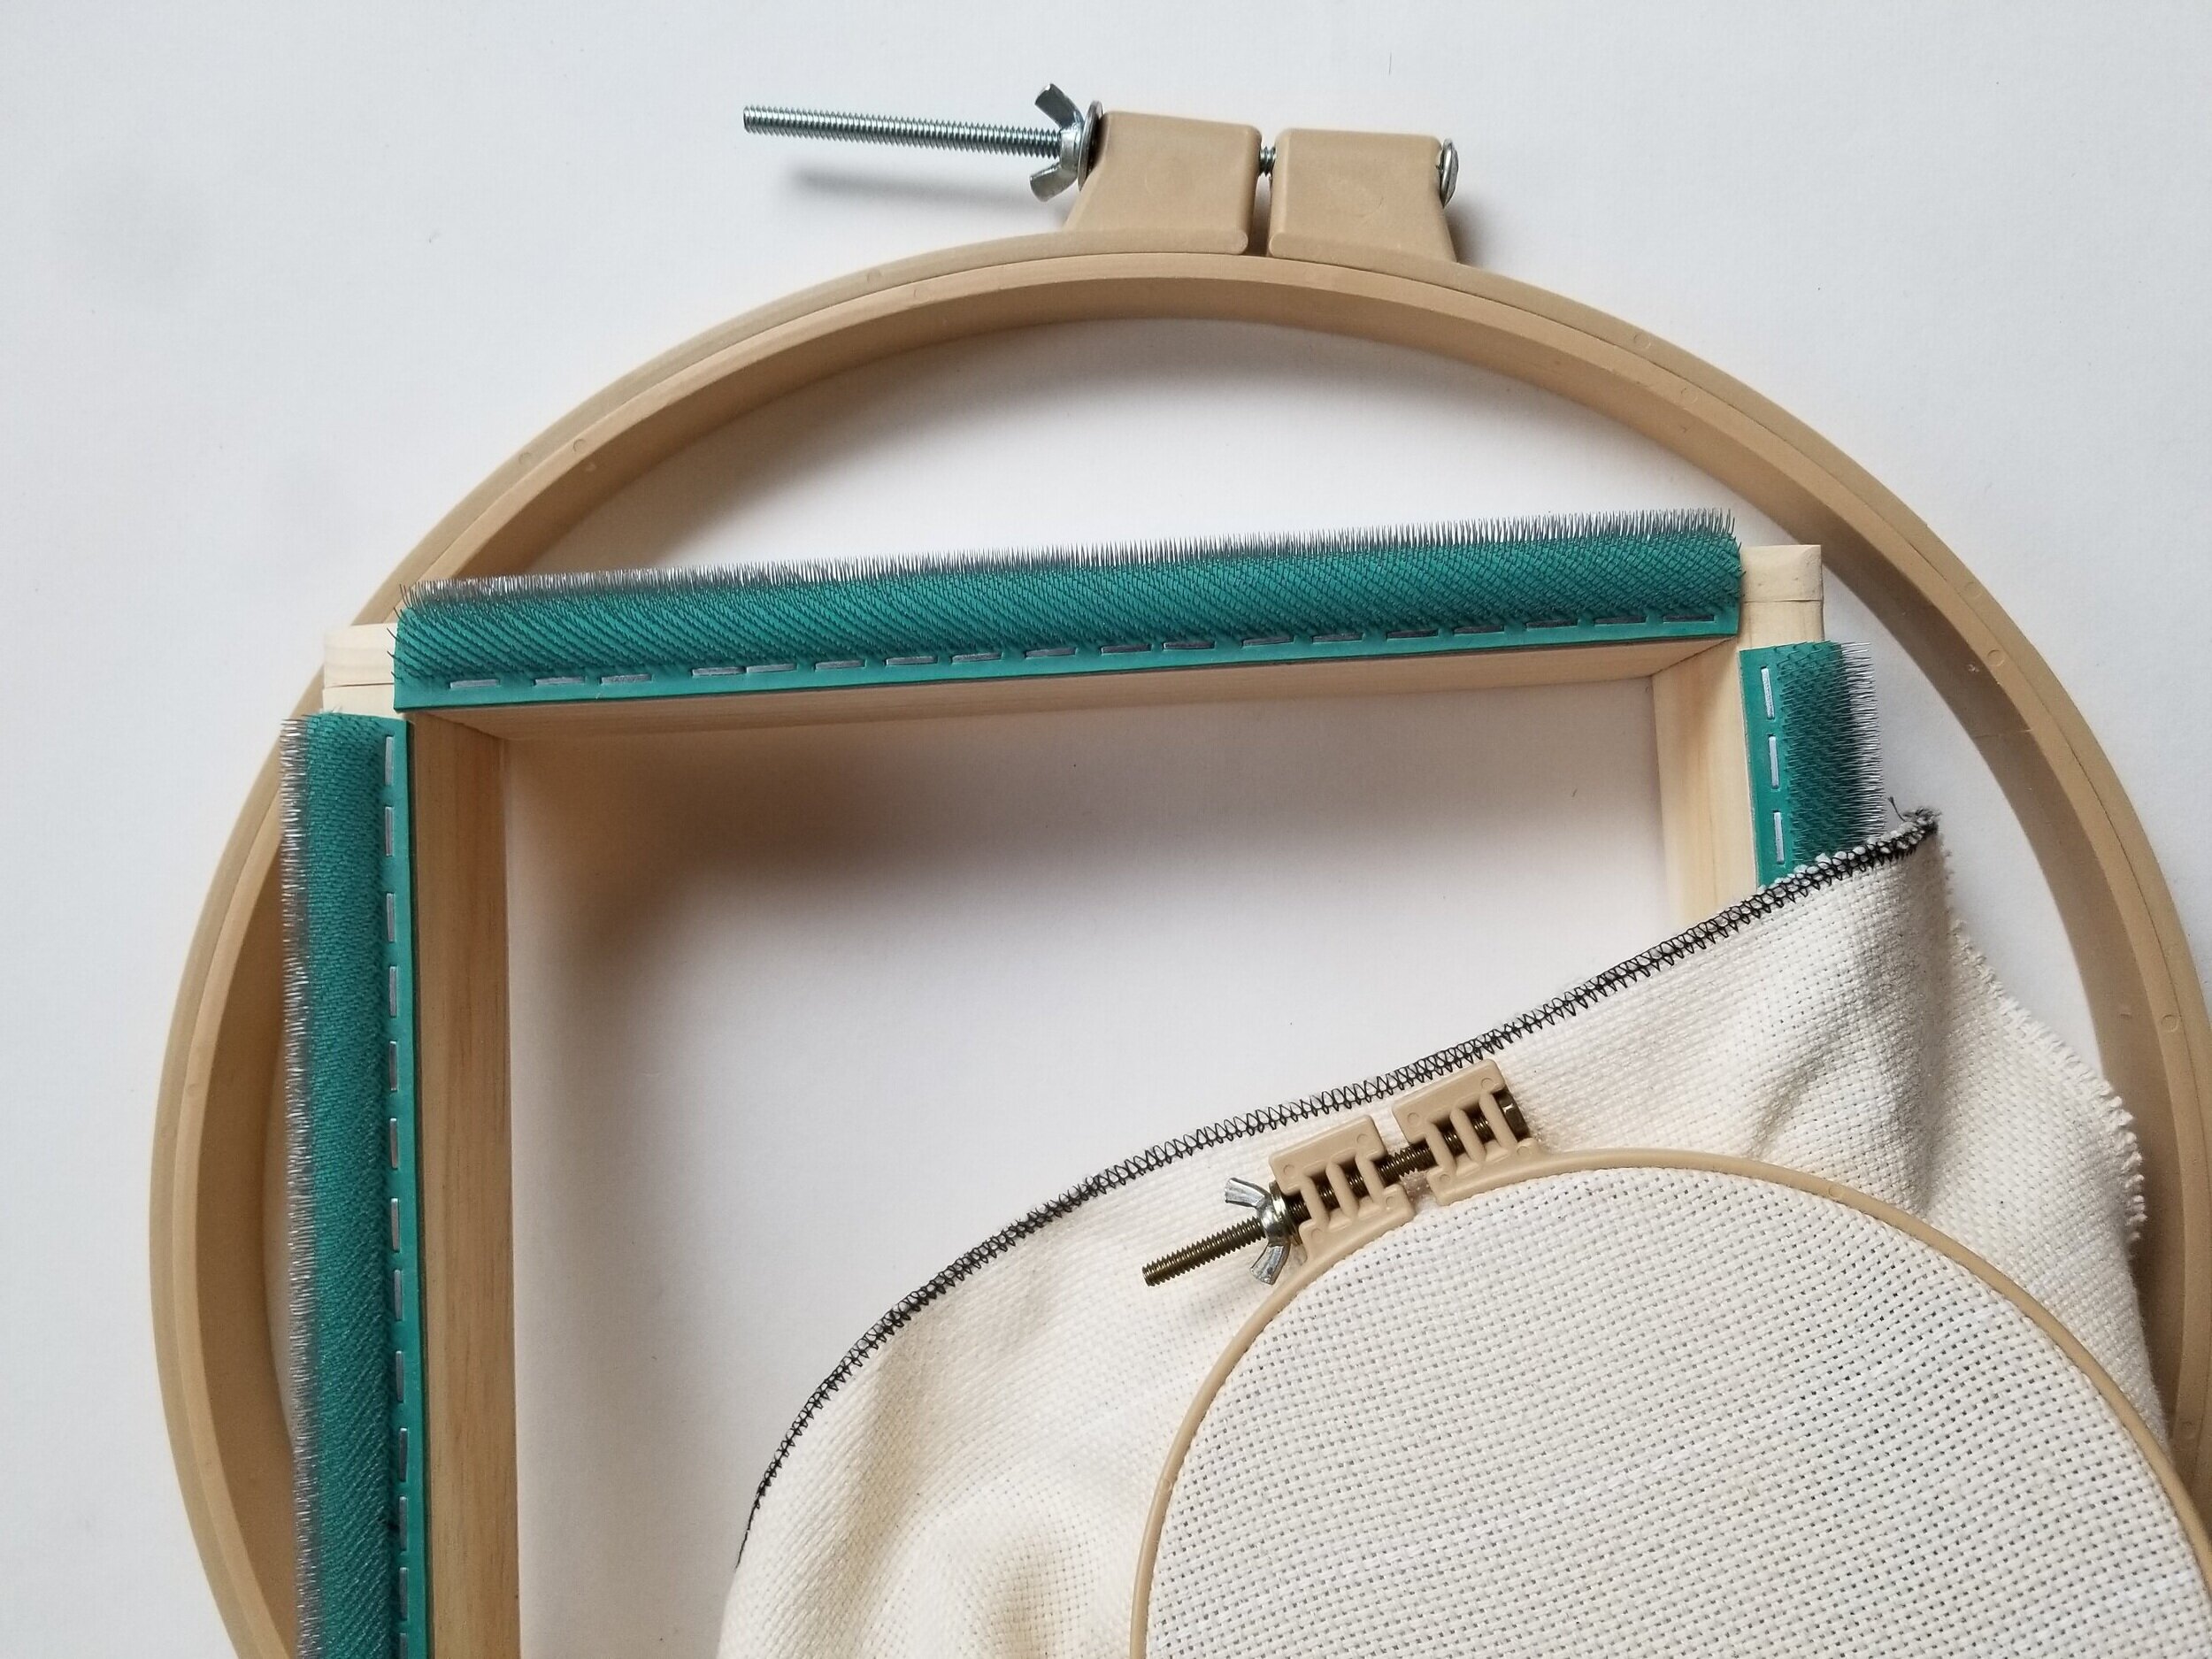 Shown: Two sizes of no-slip hoop and one gripper strip frame.